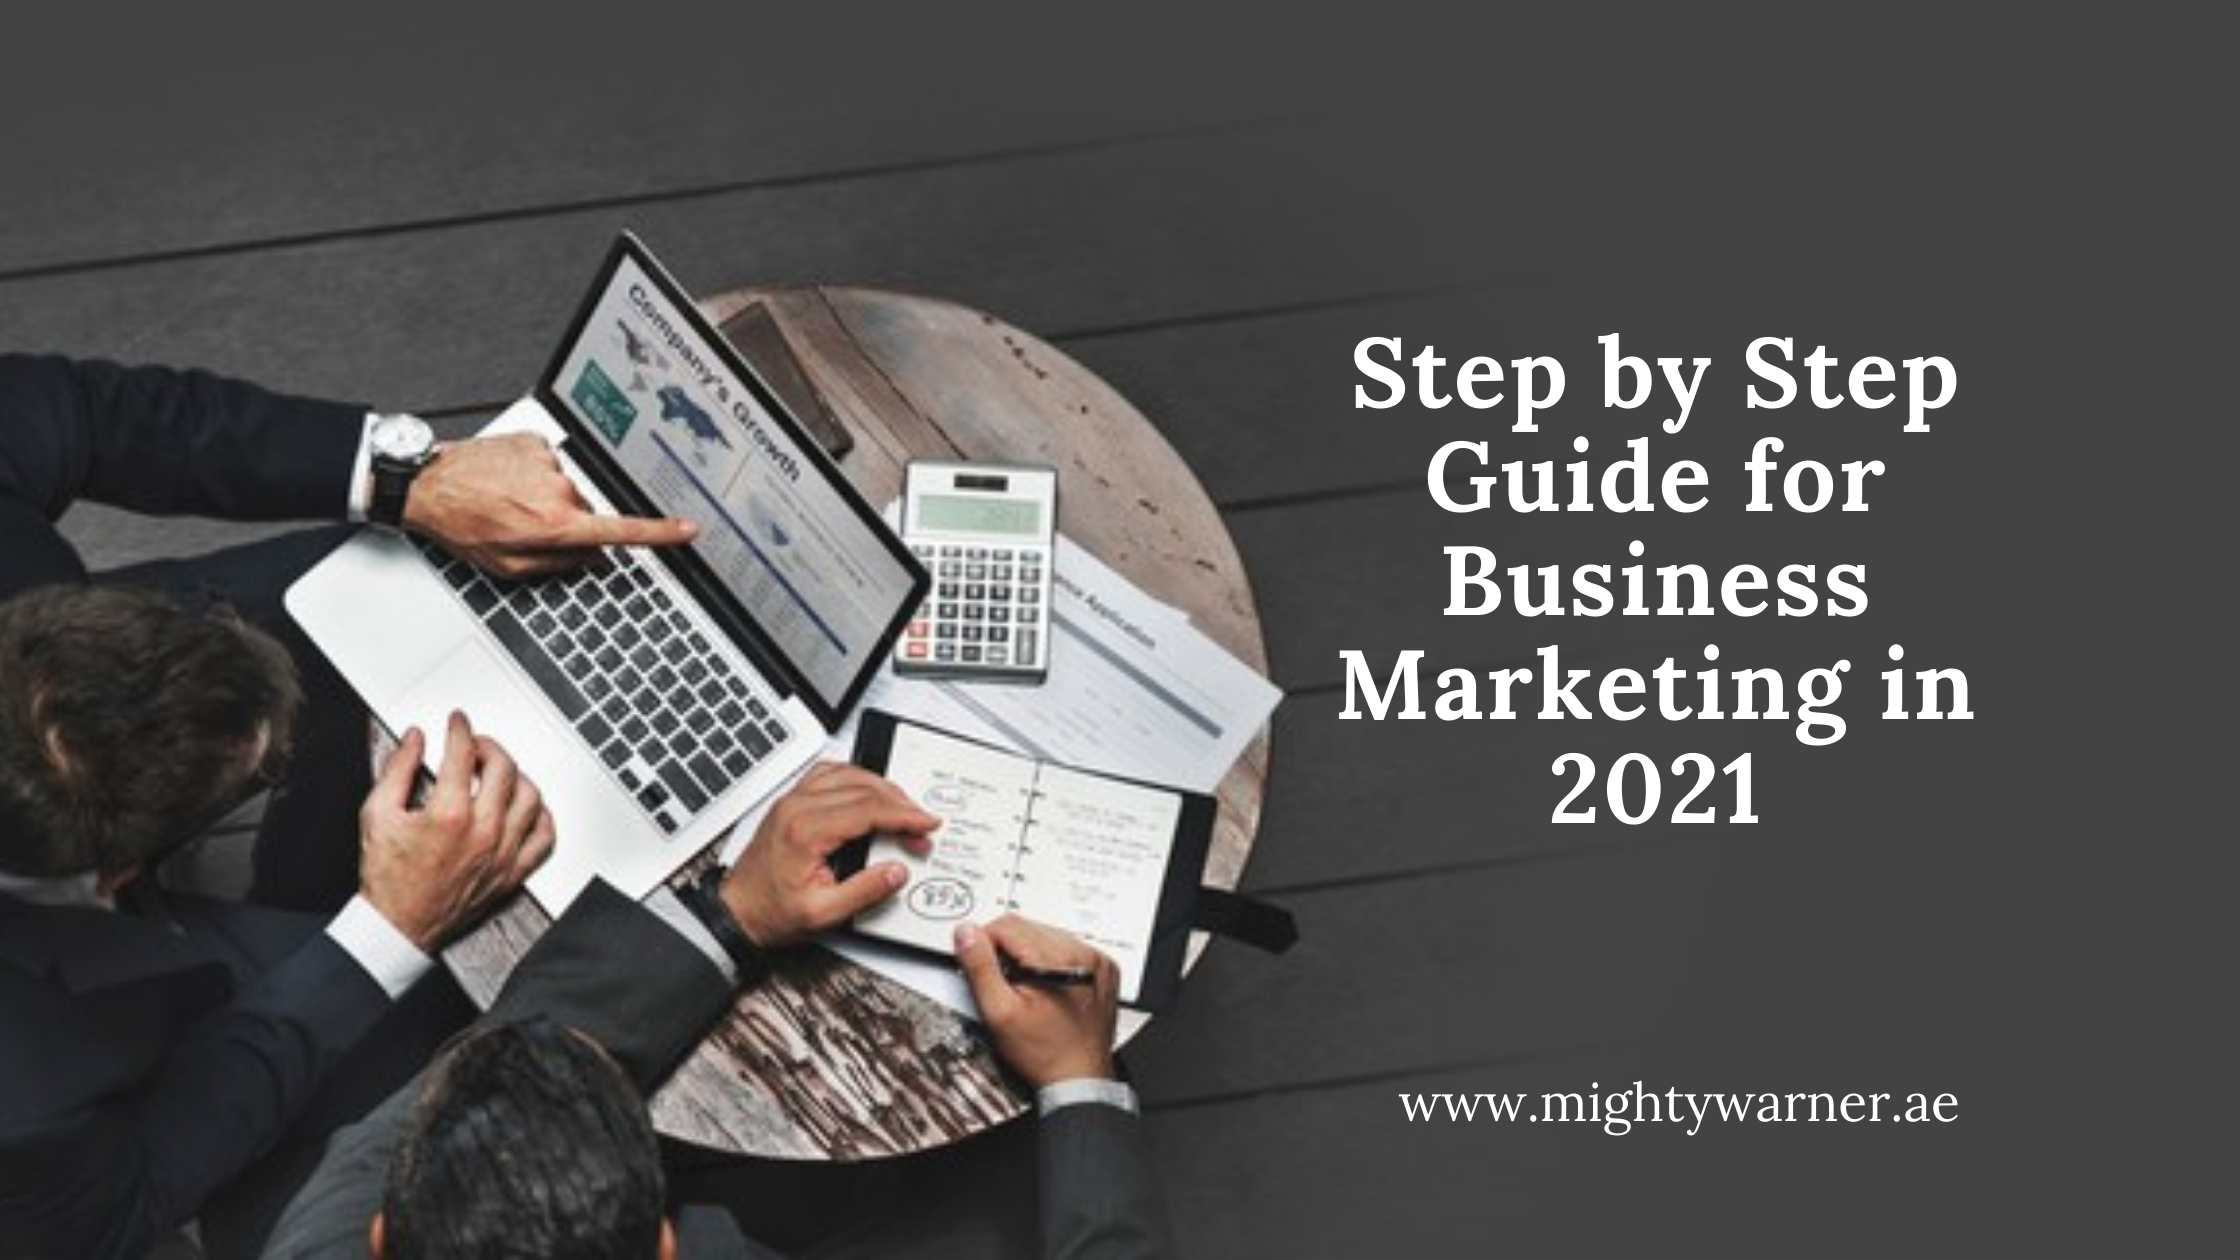 Step by Step Guide for Business Marketing in 2021